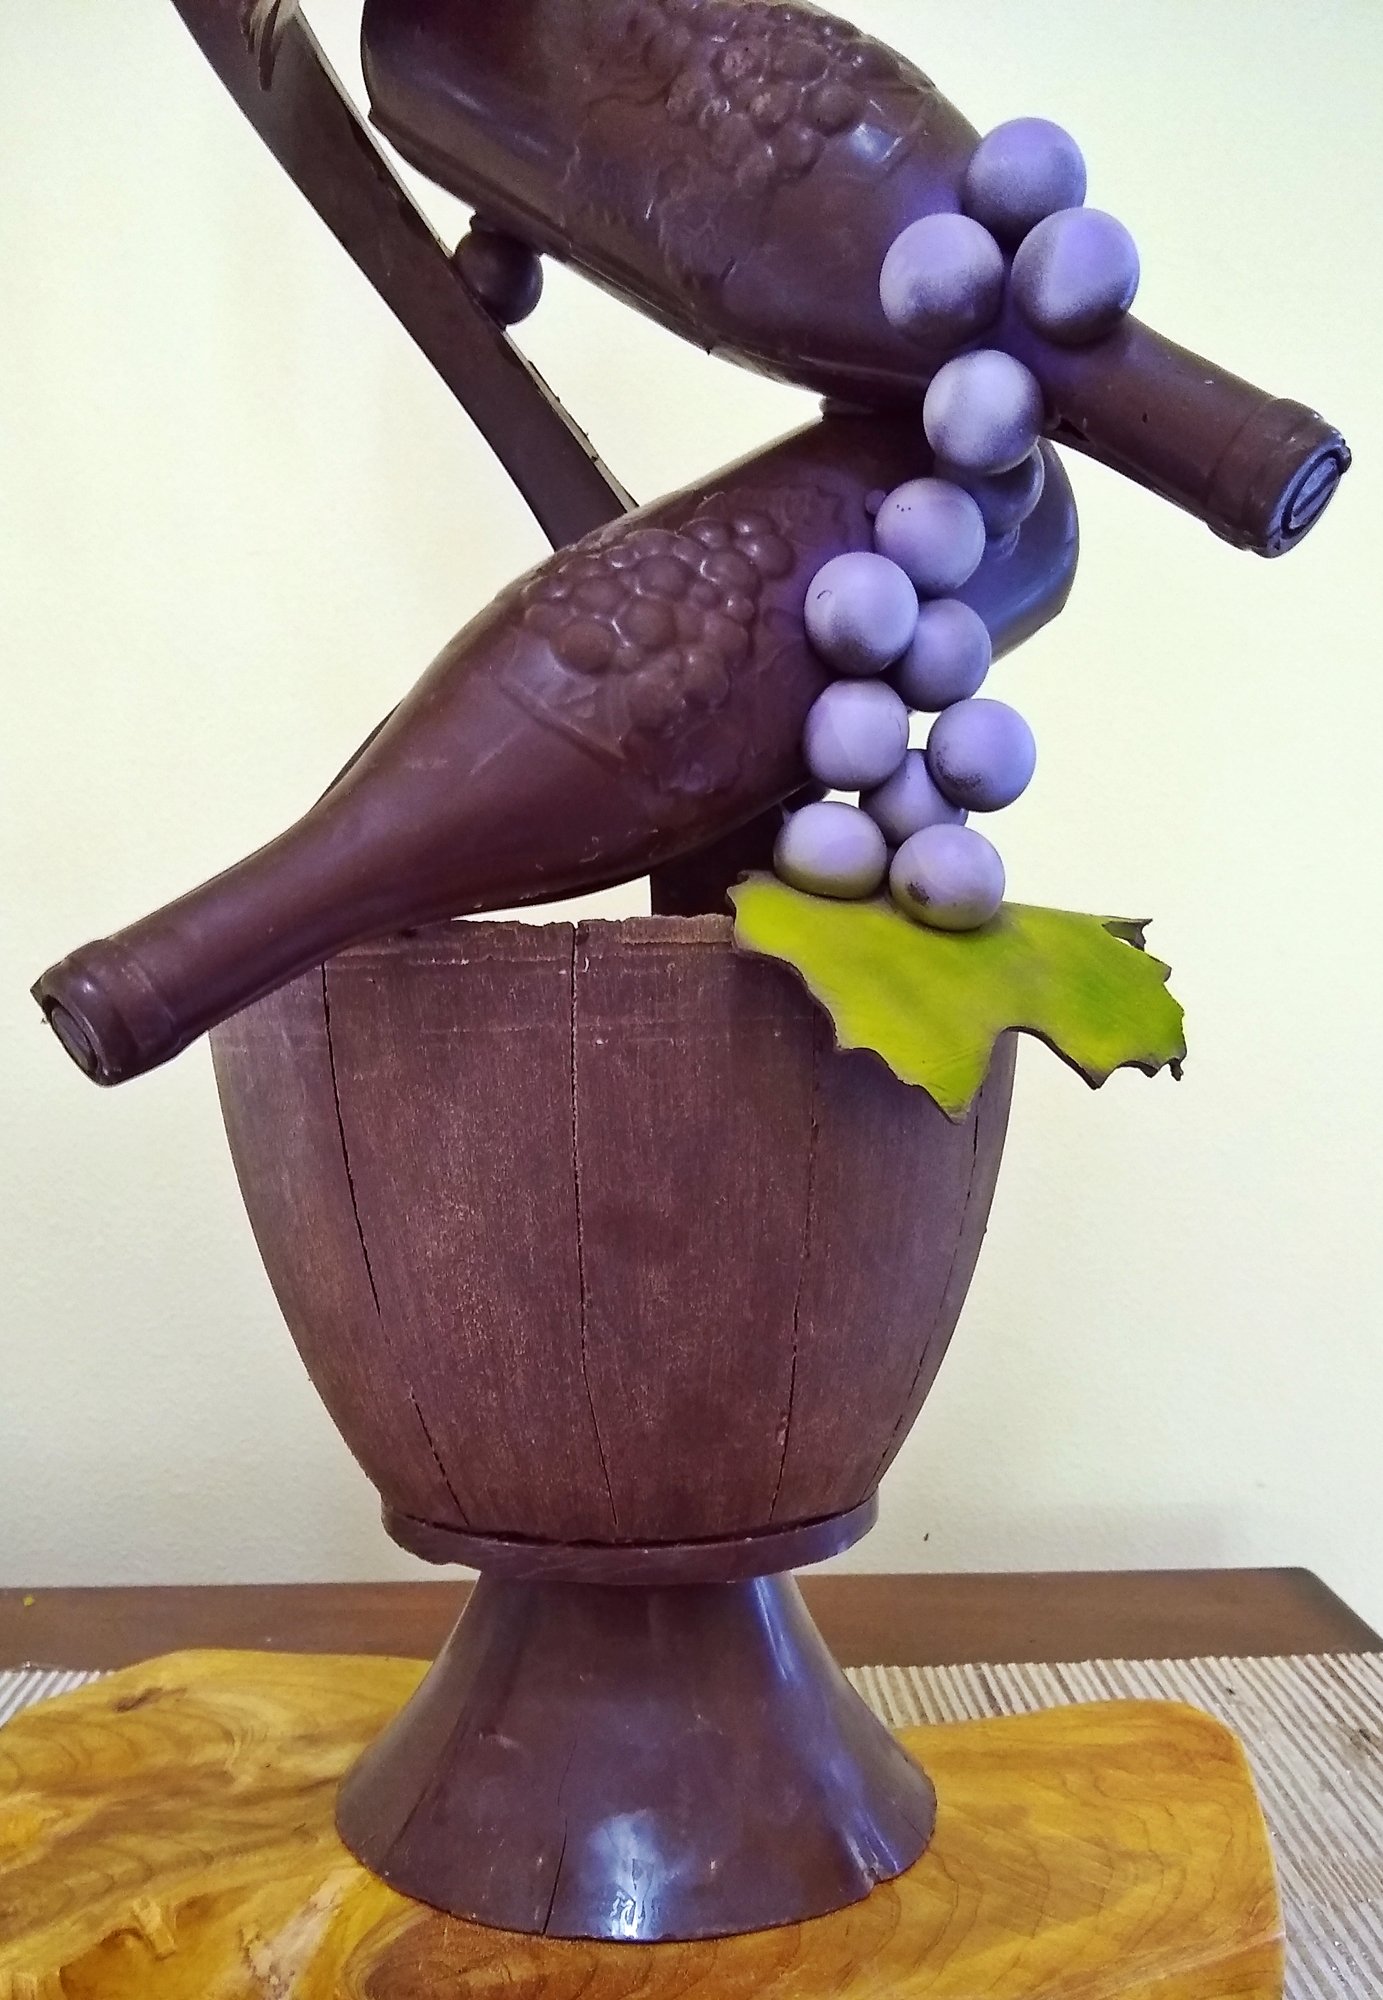  A closer view of the chocolate sculpture 